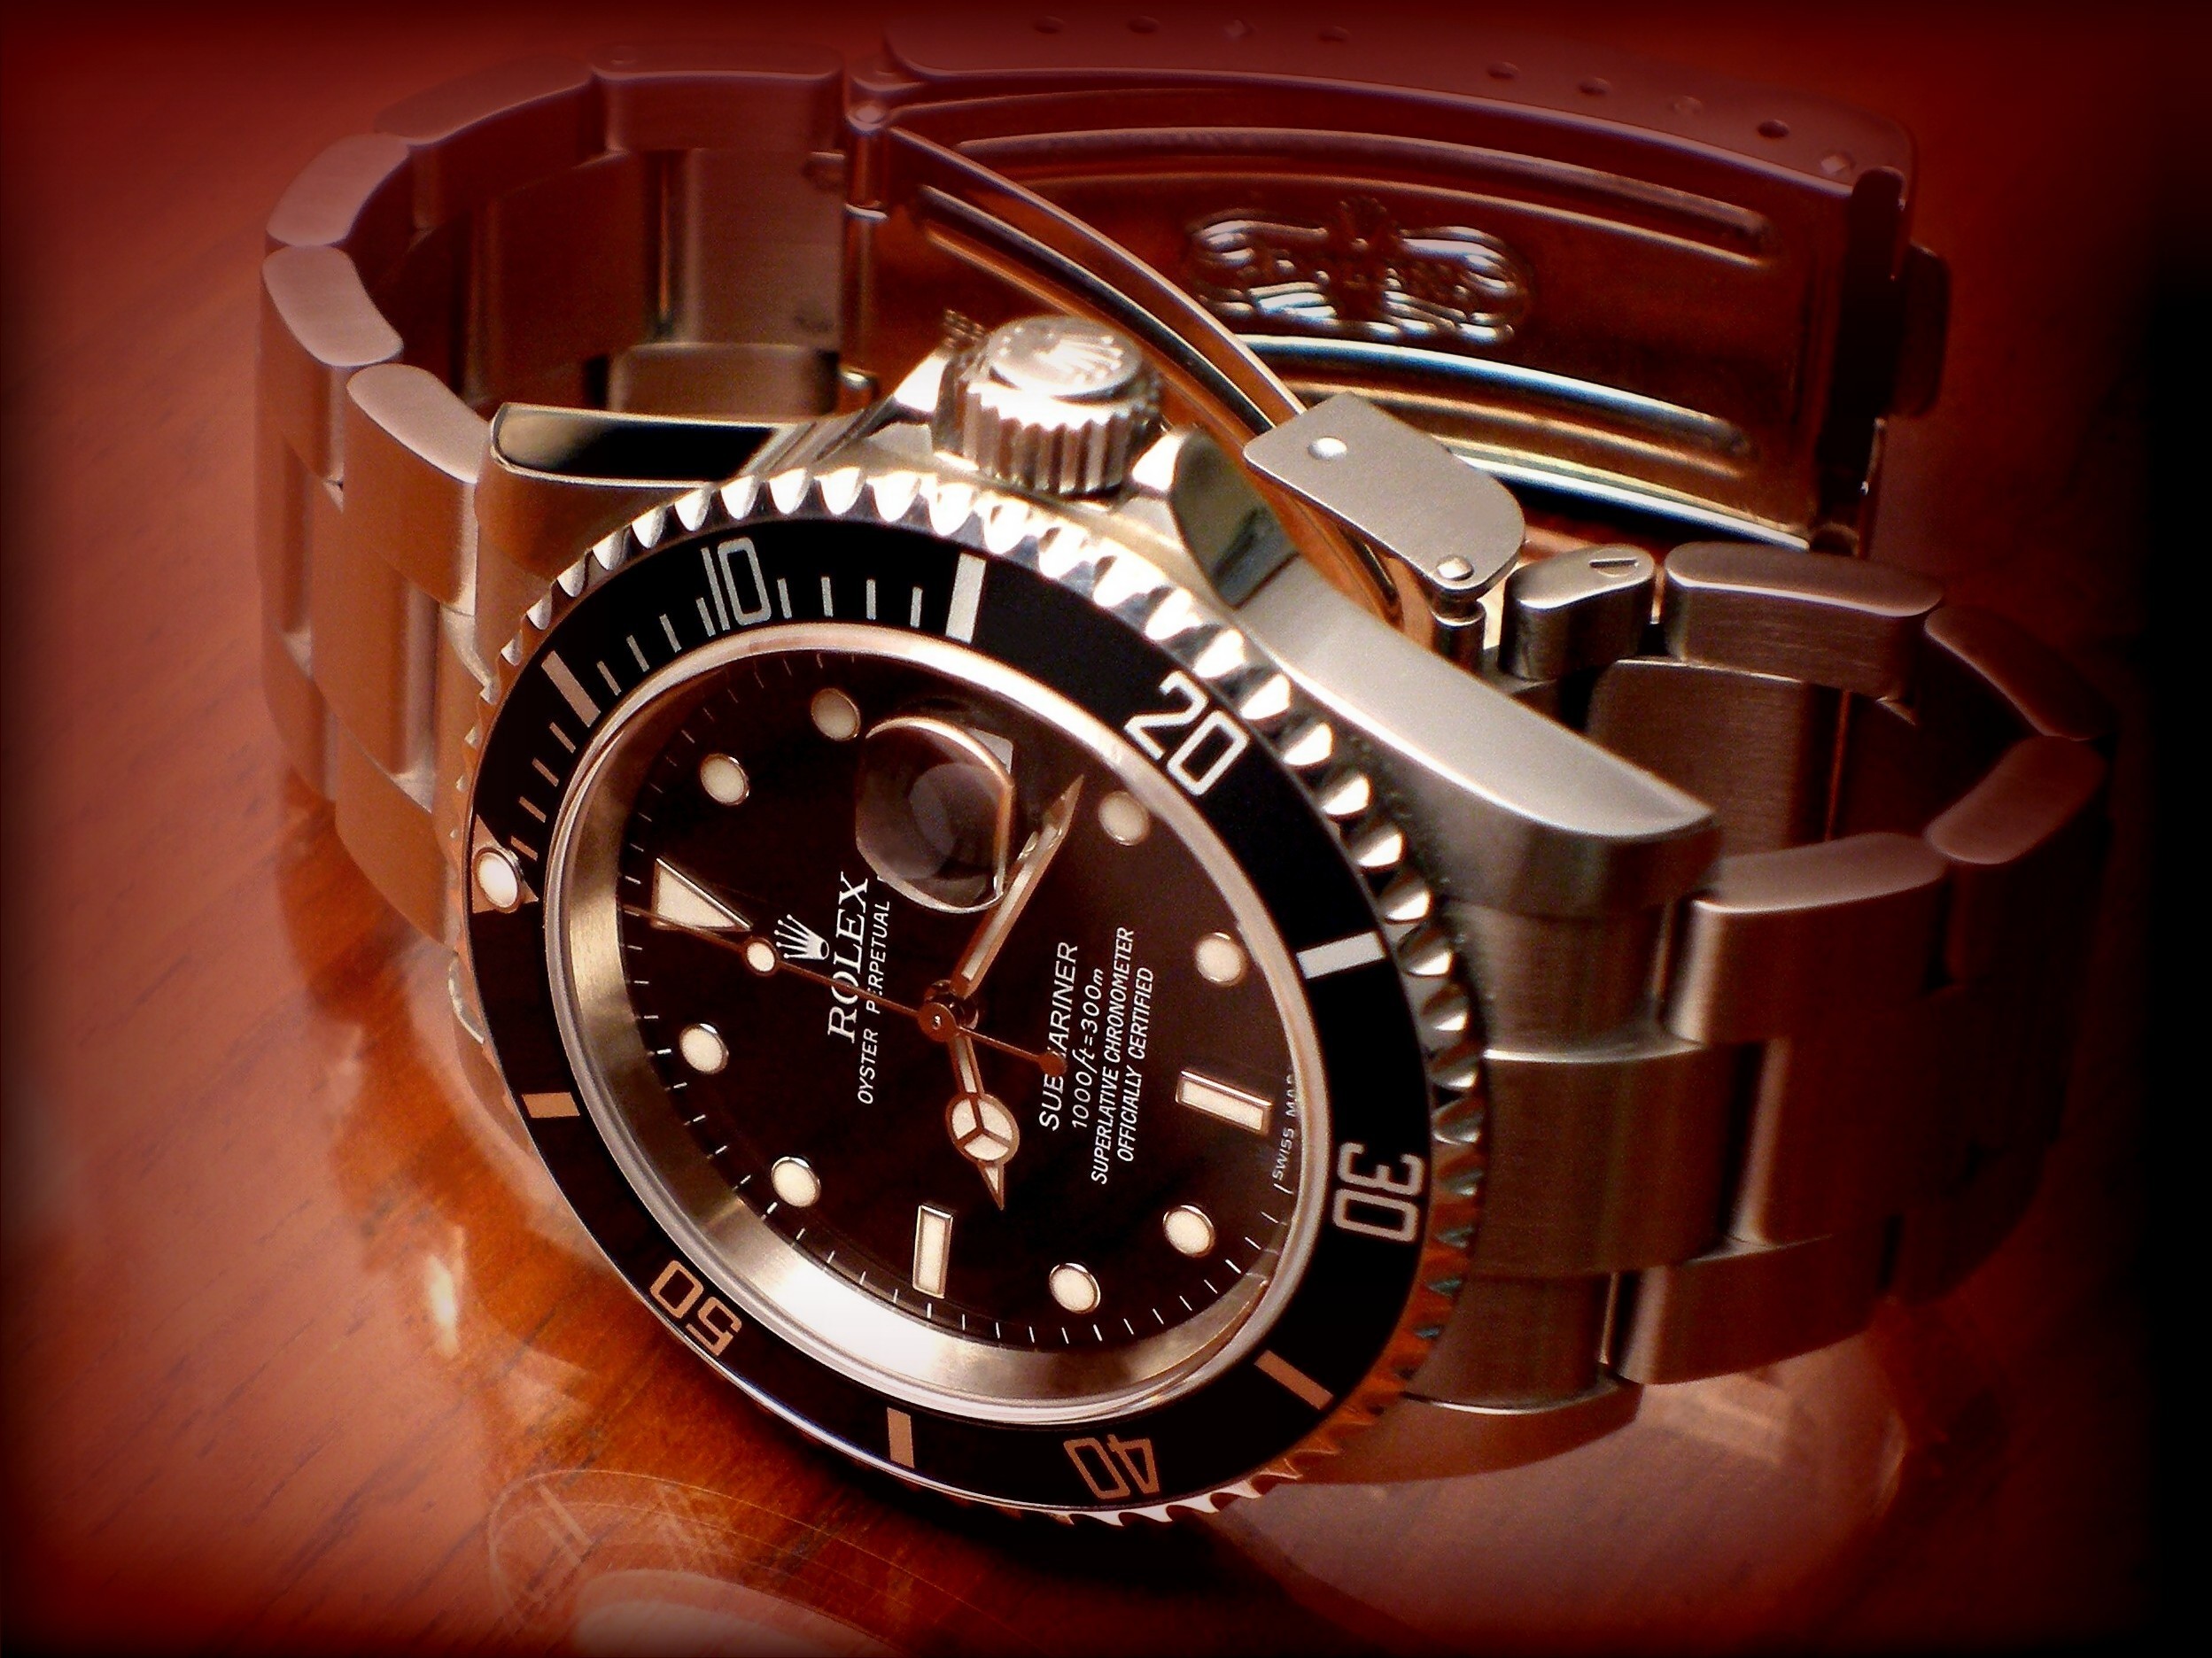  rolex oyster perpetual superlative chronometer officially certified